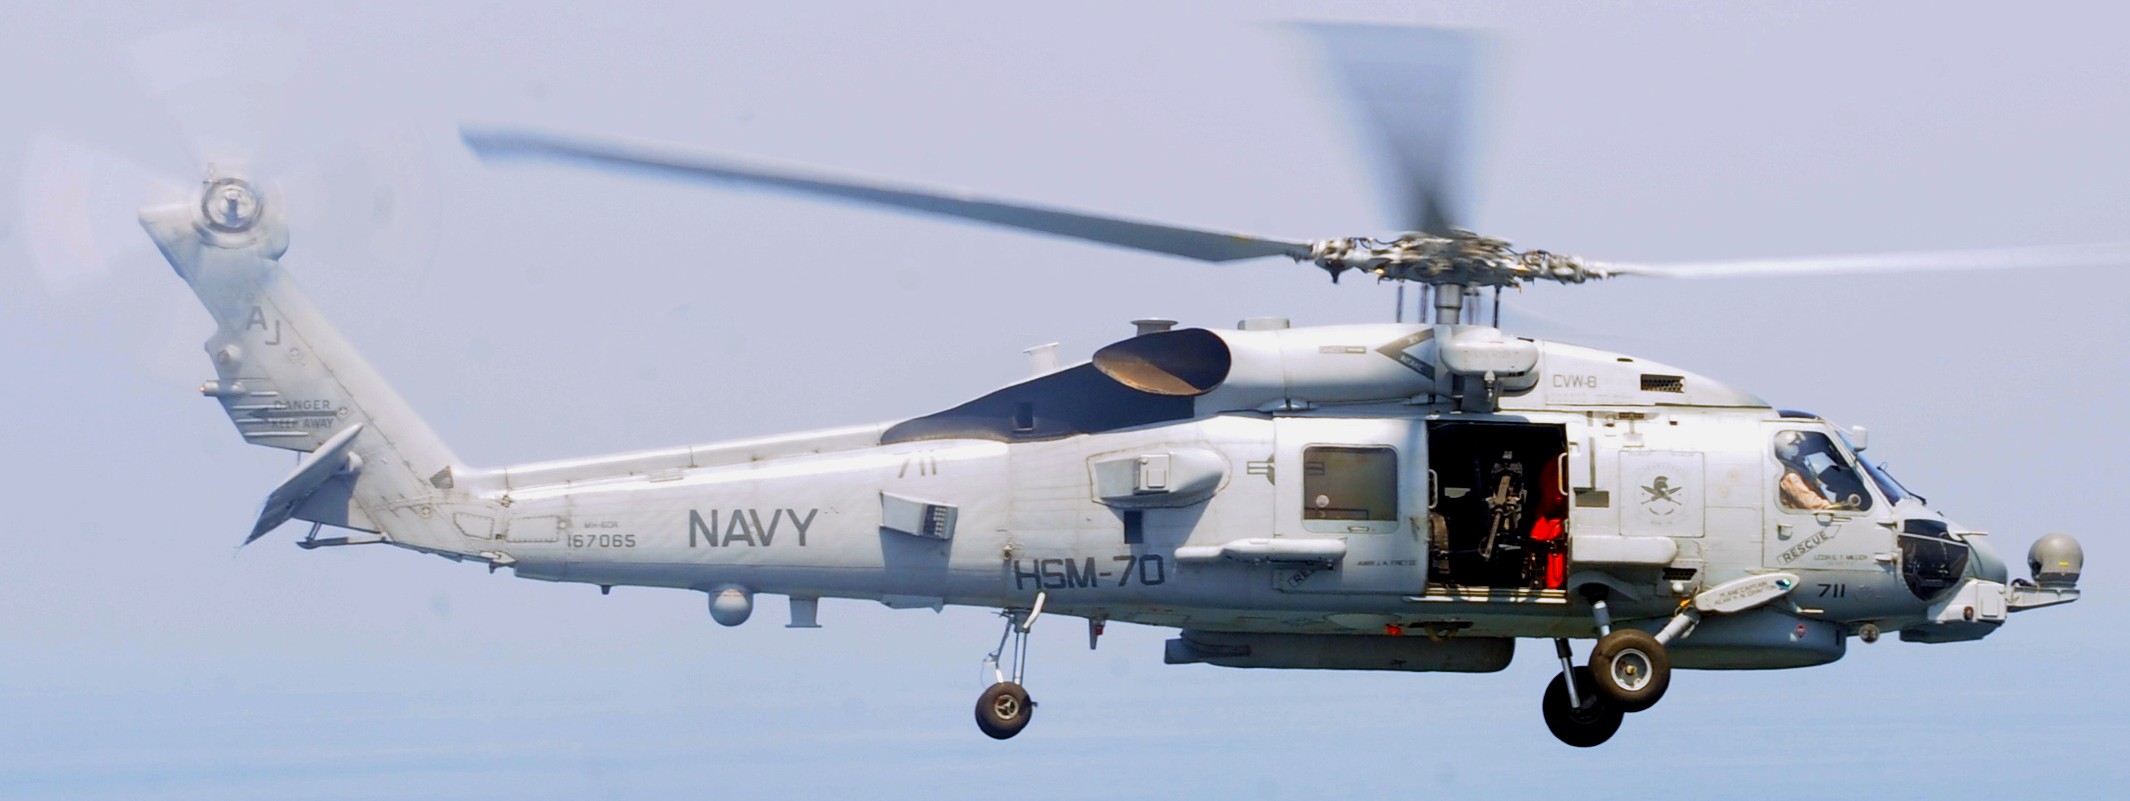 hsm-70 spartans helicopter maritime strike squadron mh-60r seahawk 2014 90 cvw-8